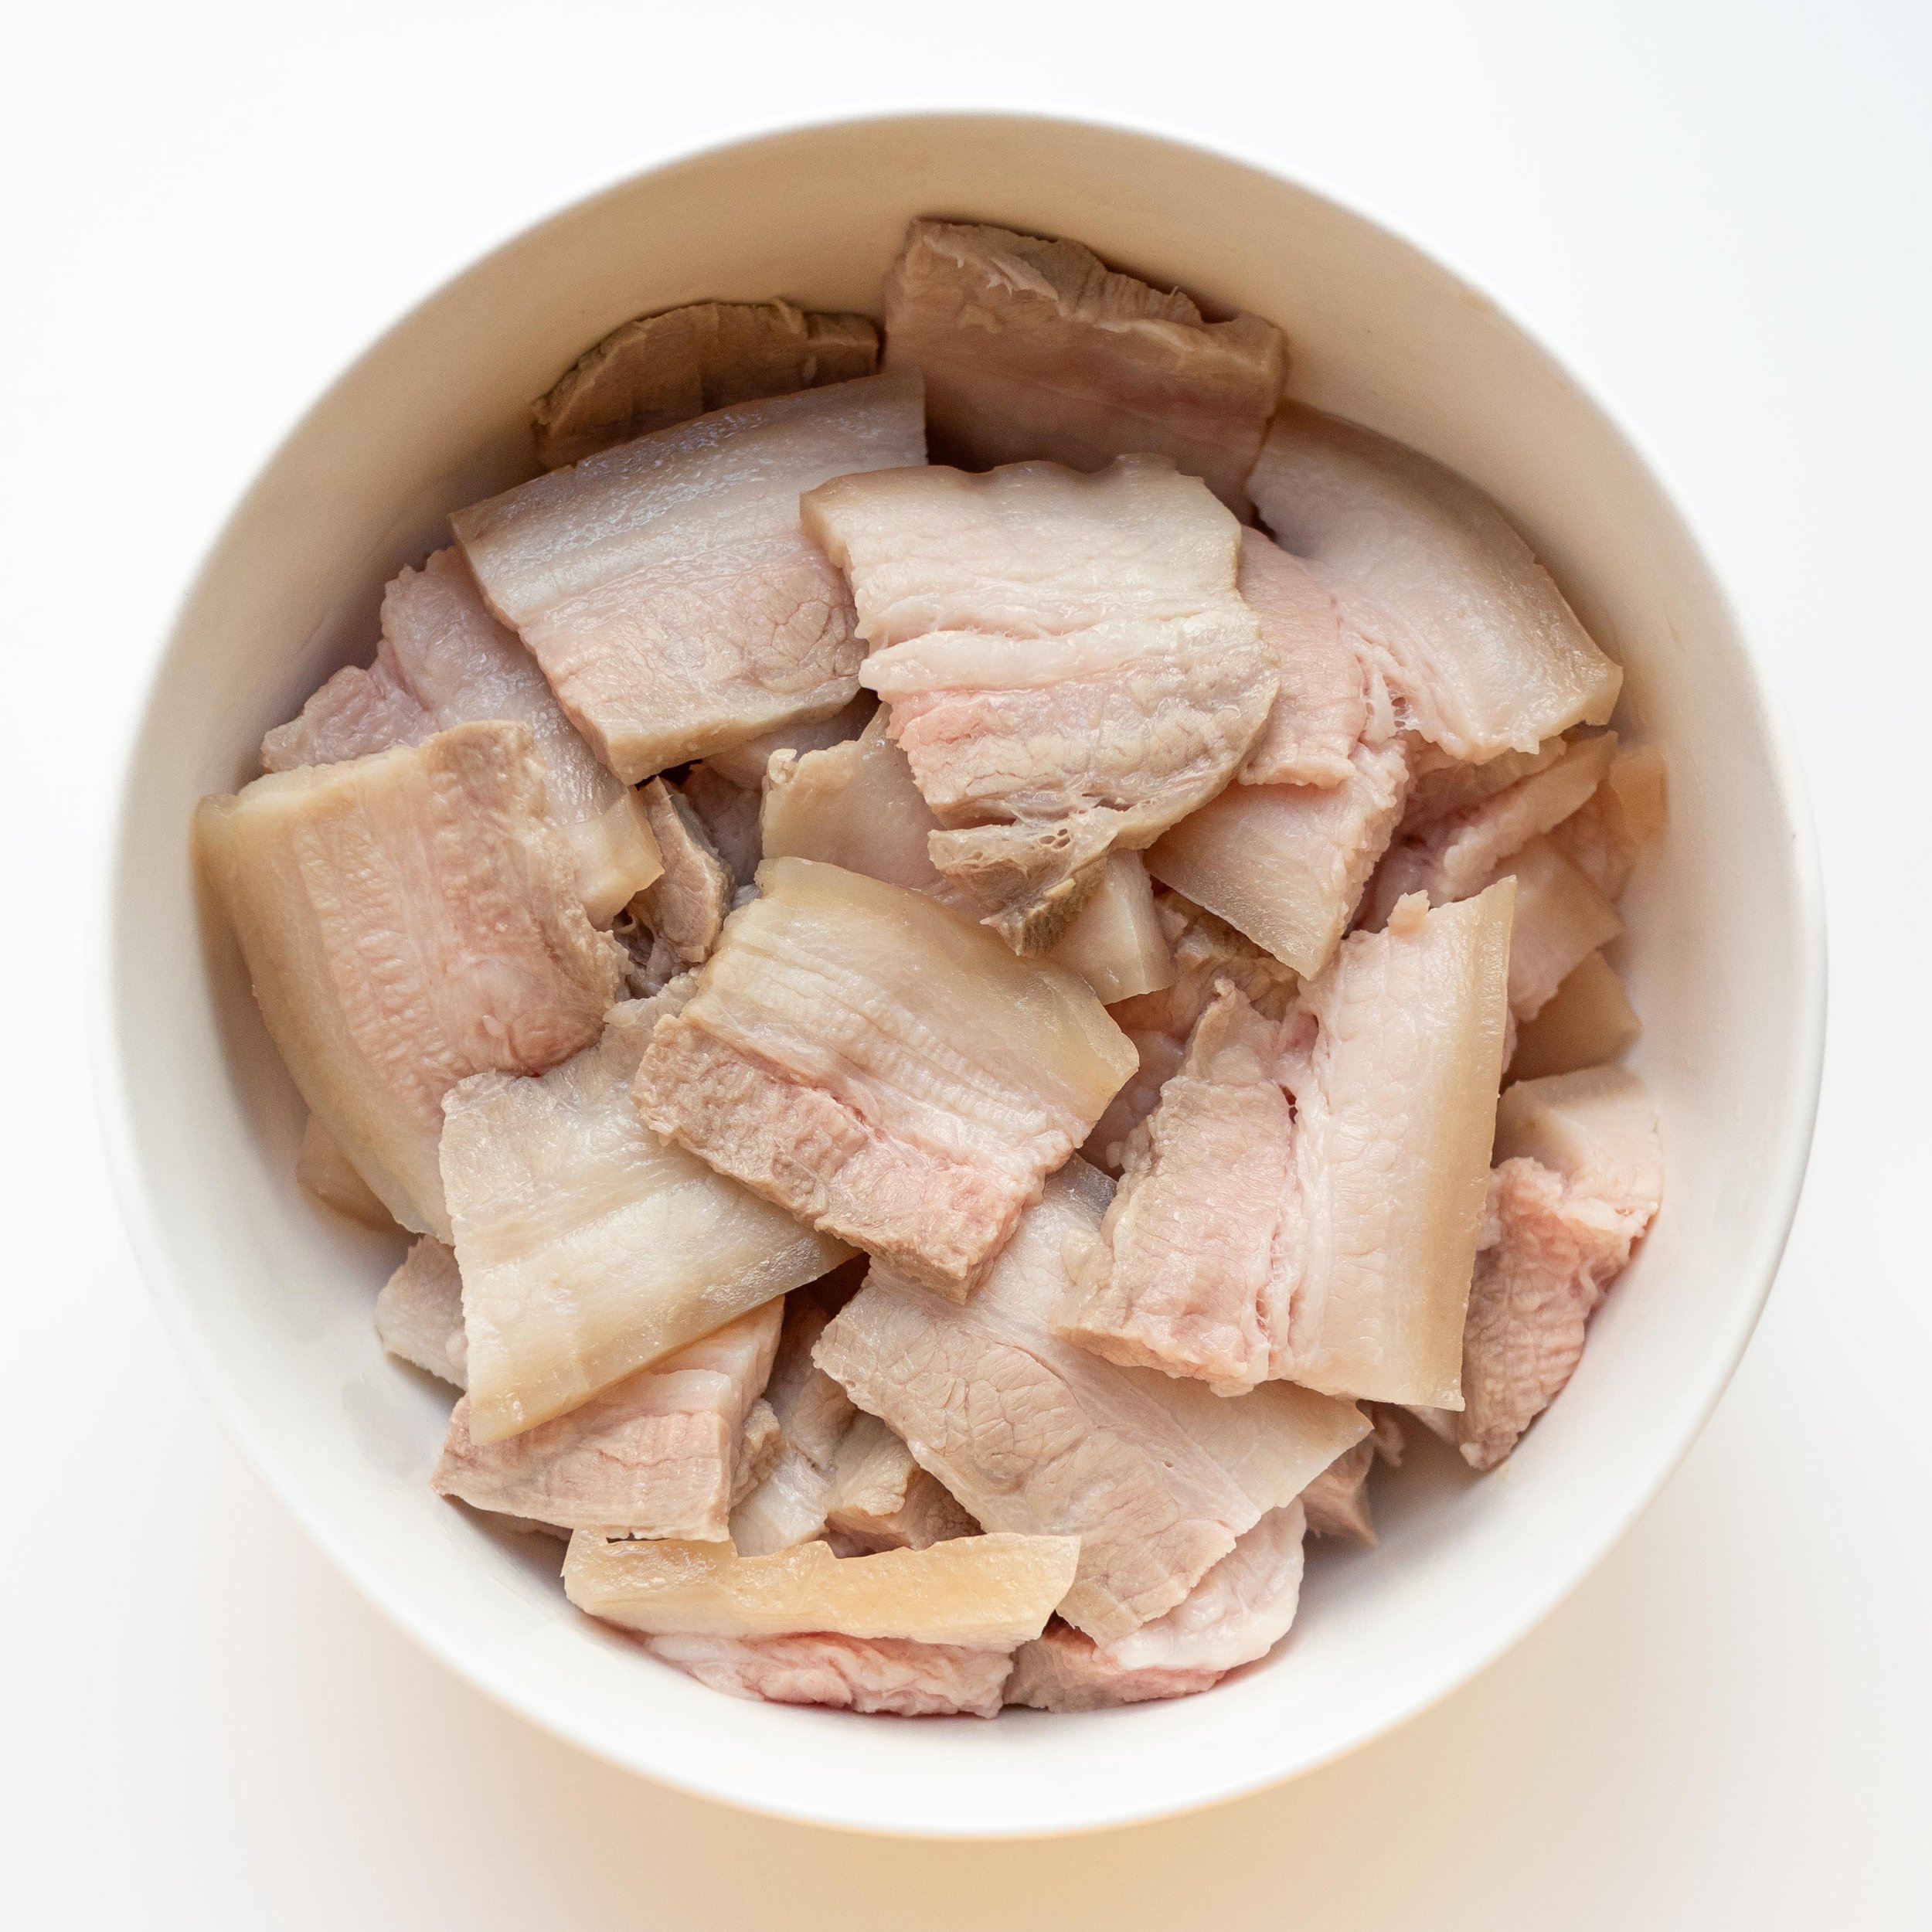 Sliced pork belly into bite-sized pieces